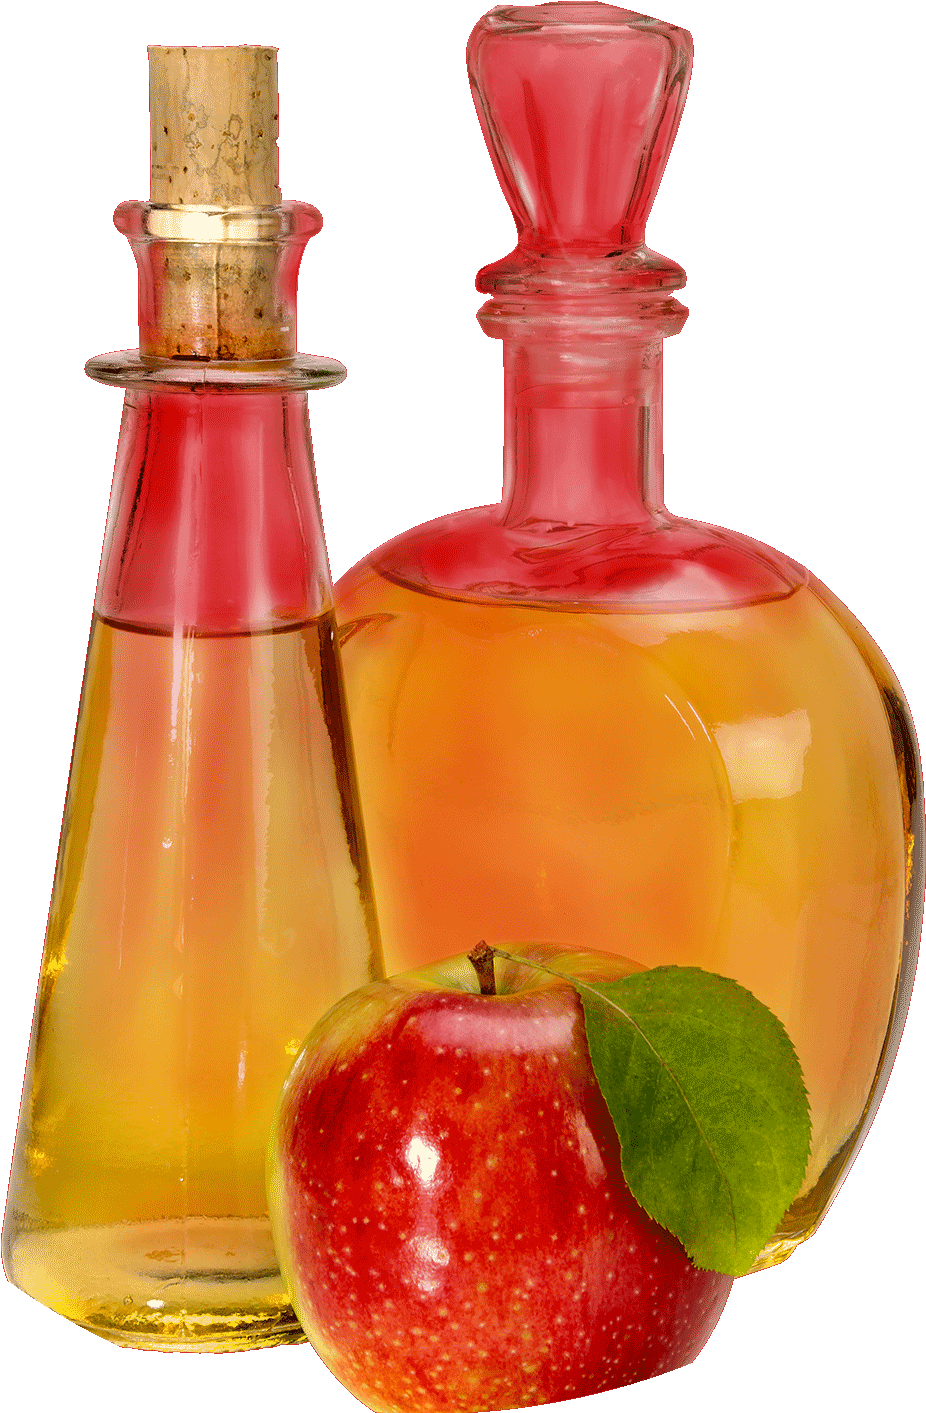 Two Glass Bottles With Liquid And An Apple